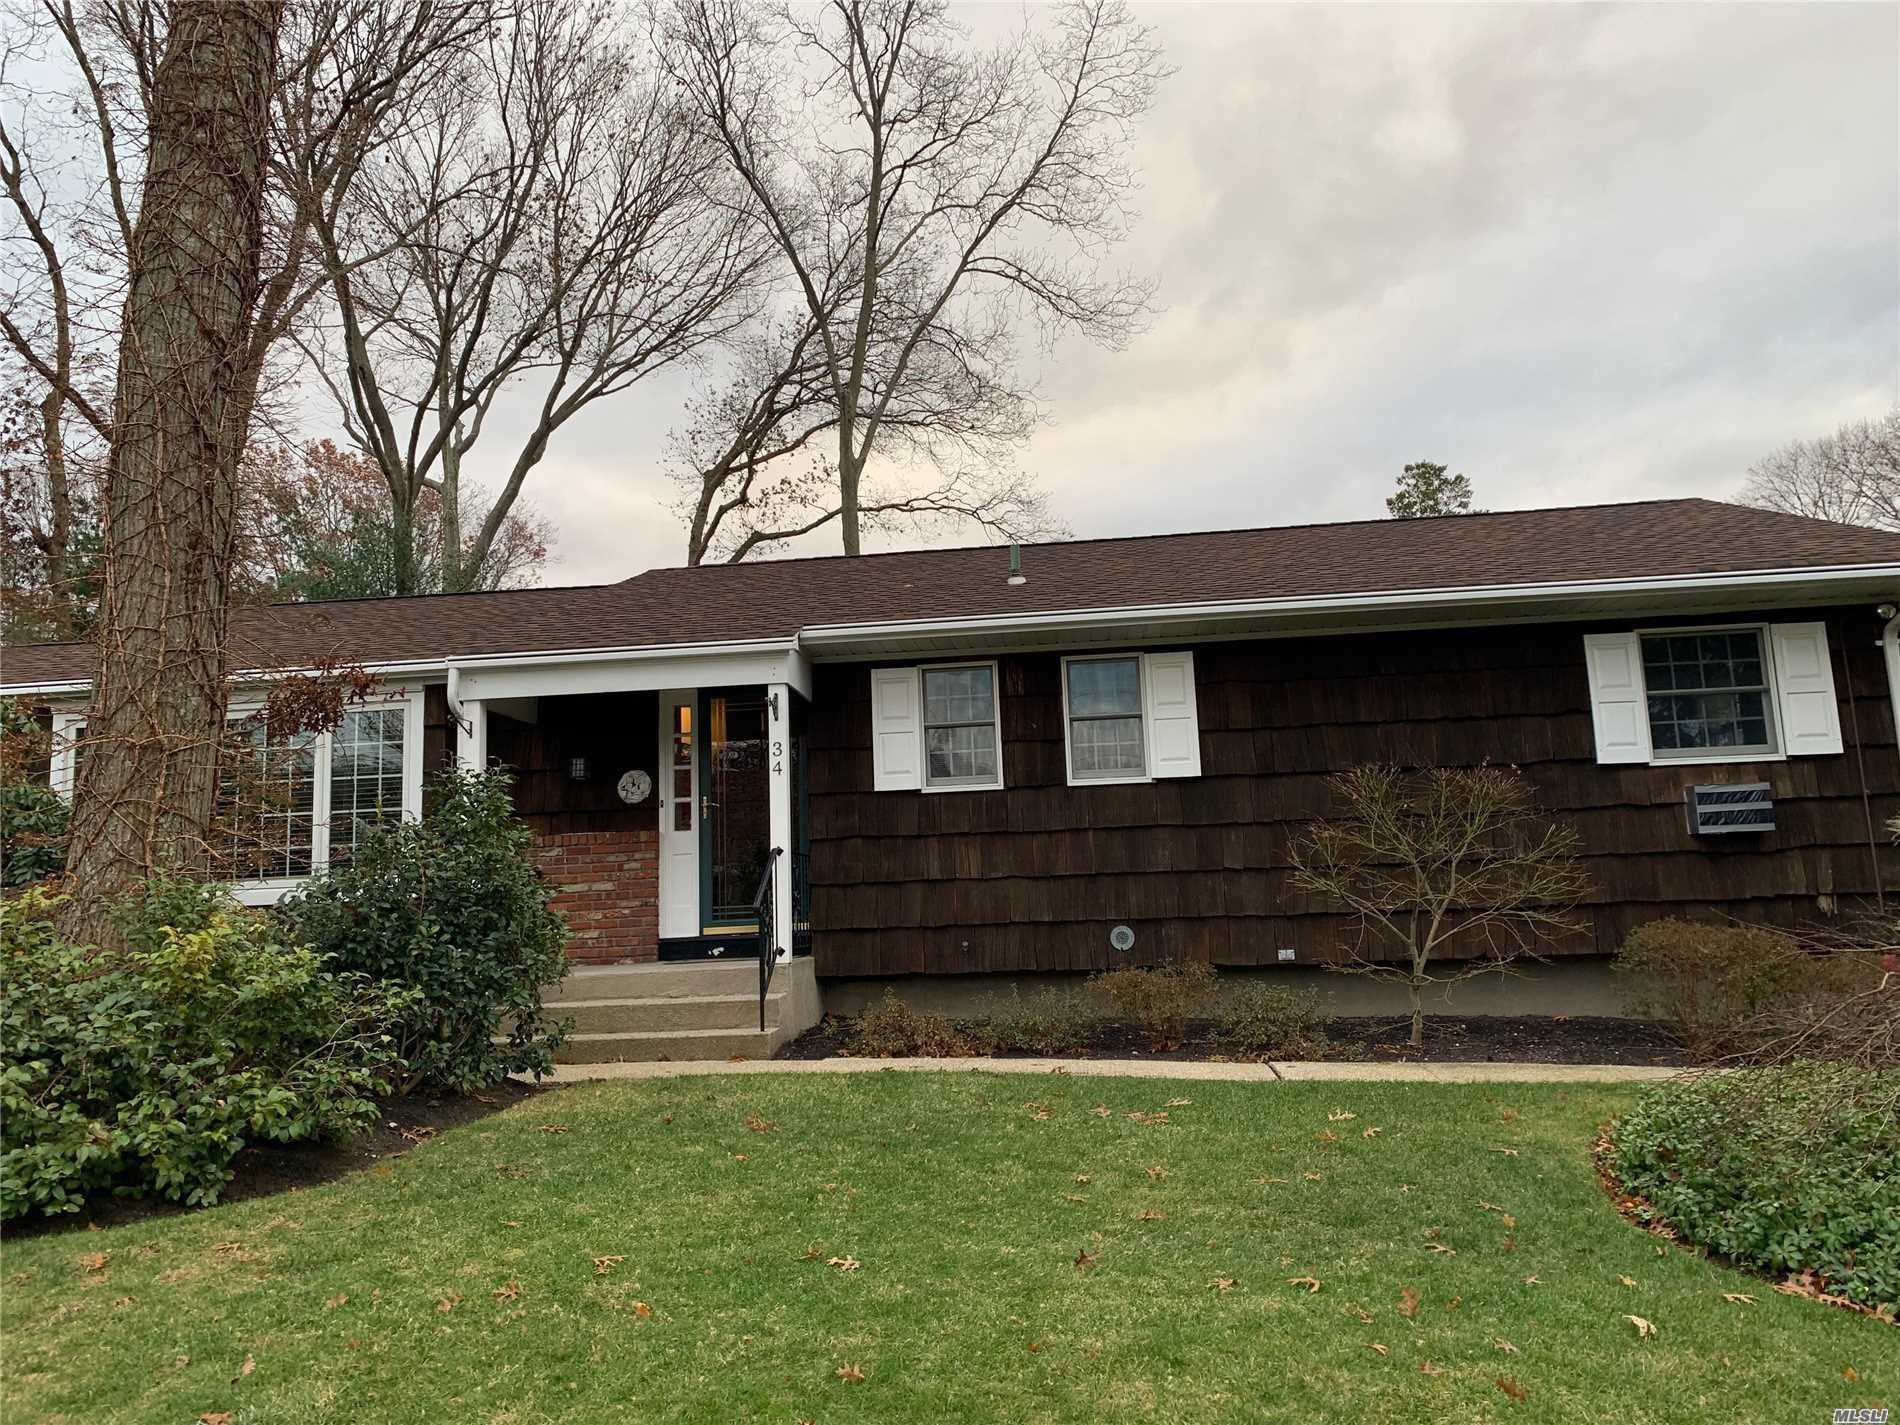 Well Appointed Ranch w Hardwood Floor throughout , Cedar Shake , Fenced Backyard, Spacious Bedrooms, 2 Zones for Heat, Sprinklers , Roof 5 Years Old, Burner 5 Years Old , H/W Heater 5 Years Old , Full Finished Basement, EIK, DR and Den w Fireplace, Beautiful Cared For Mature Specimen Trees and Gardens